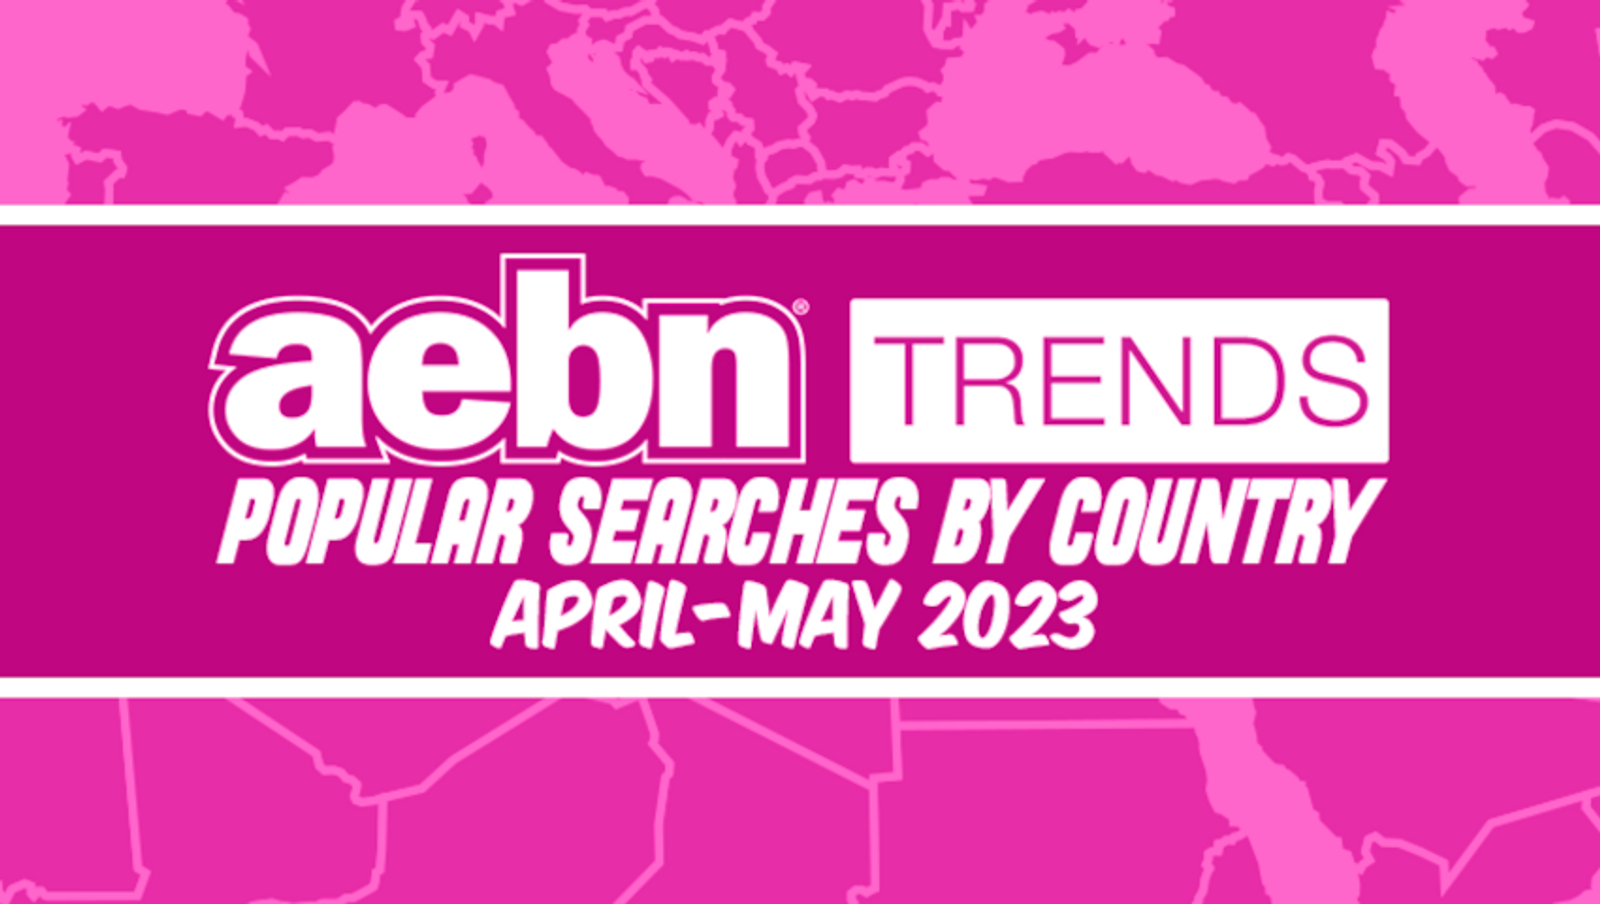 AEBN Publishes Popular Searches by Country for April & May 2023